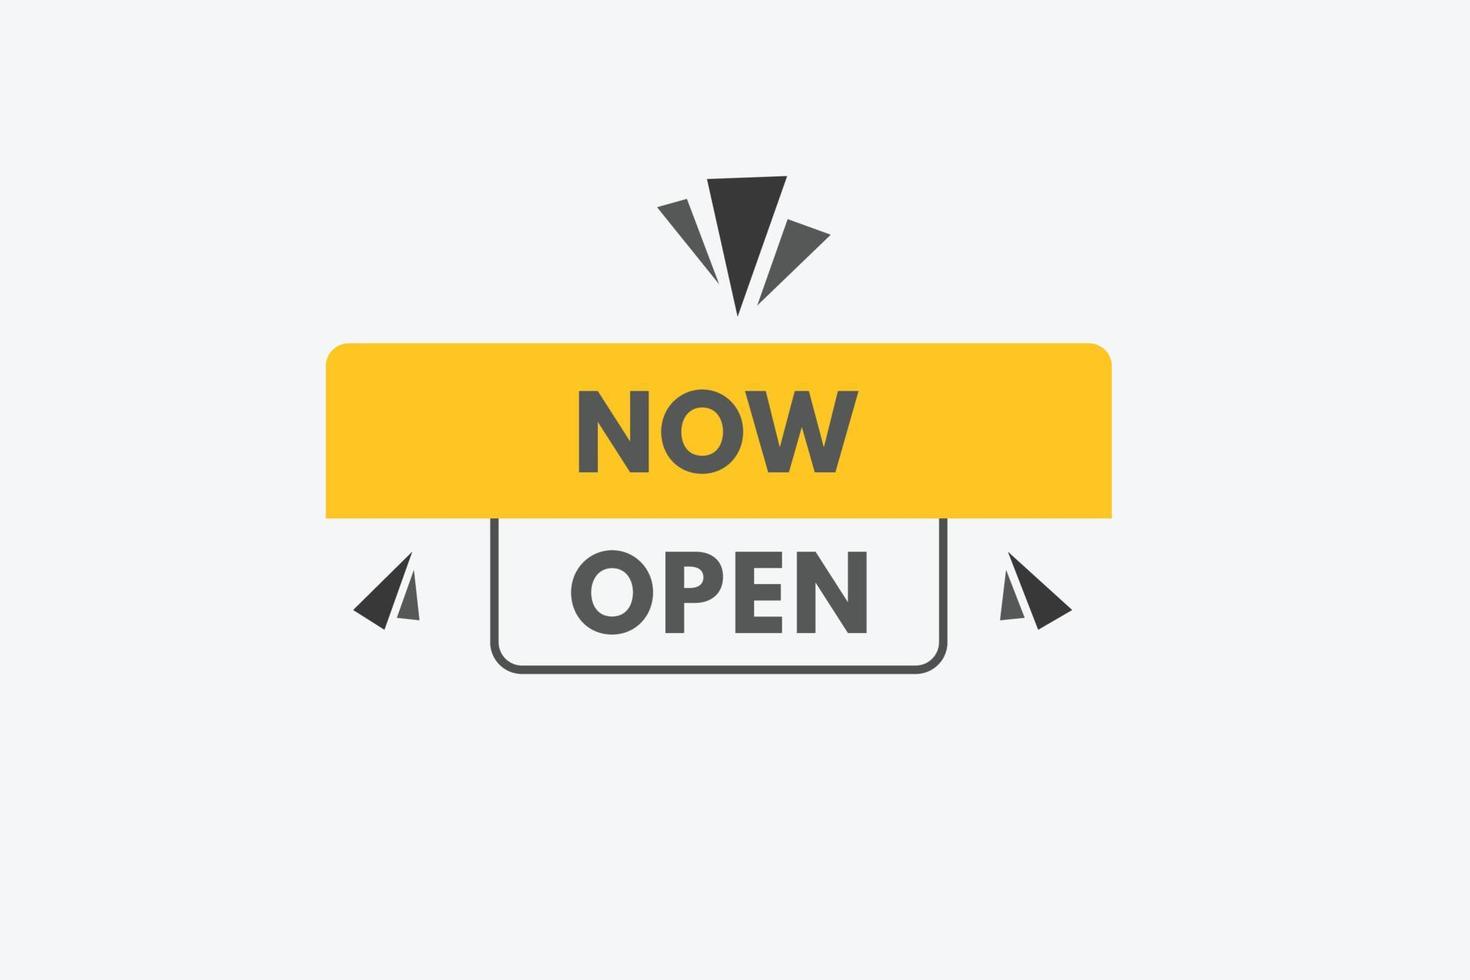 Now open text Button. Now open Sign Icon Label Sticker Web Buttons vector